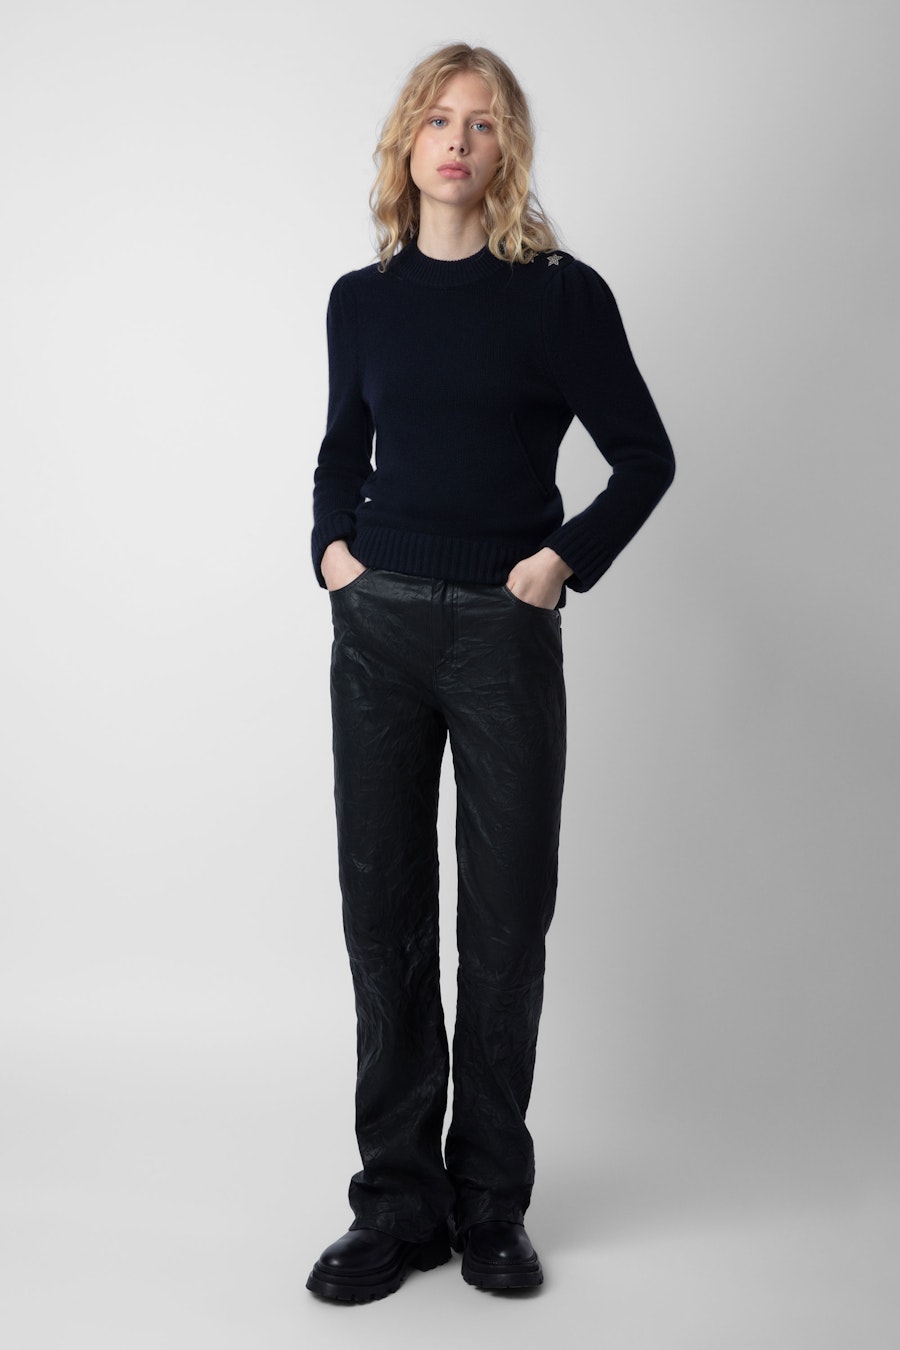 ZADIG&VOLTAIRE Betson Jewelled Cashmere Sweater